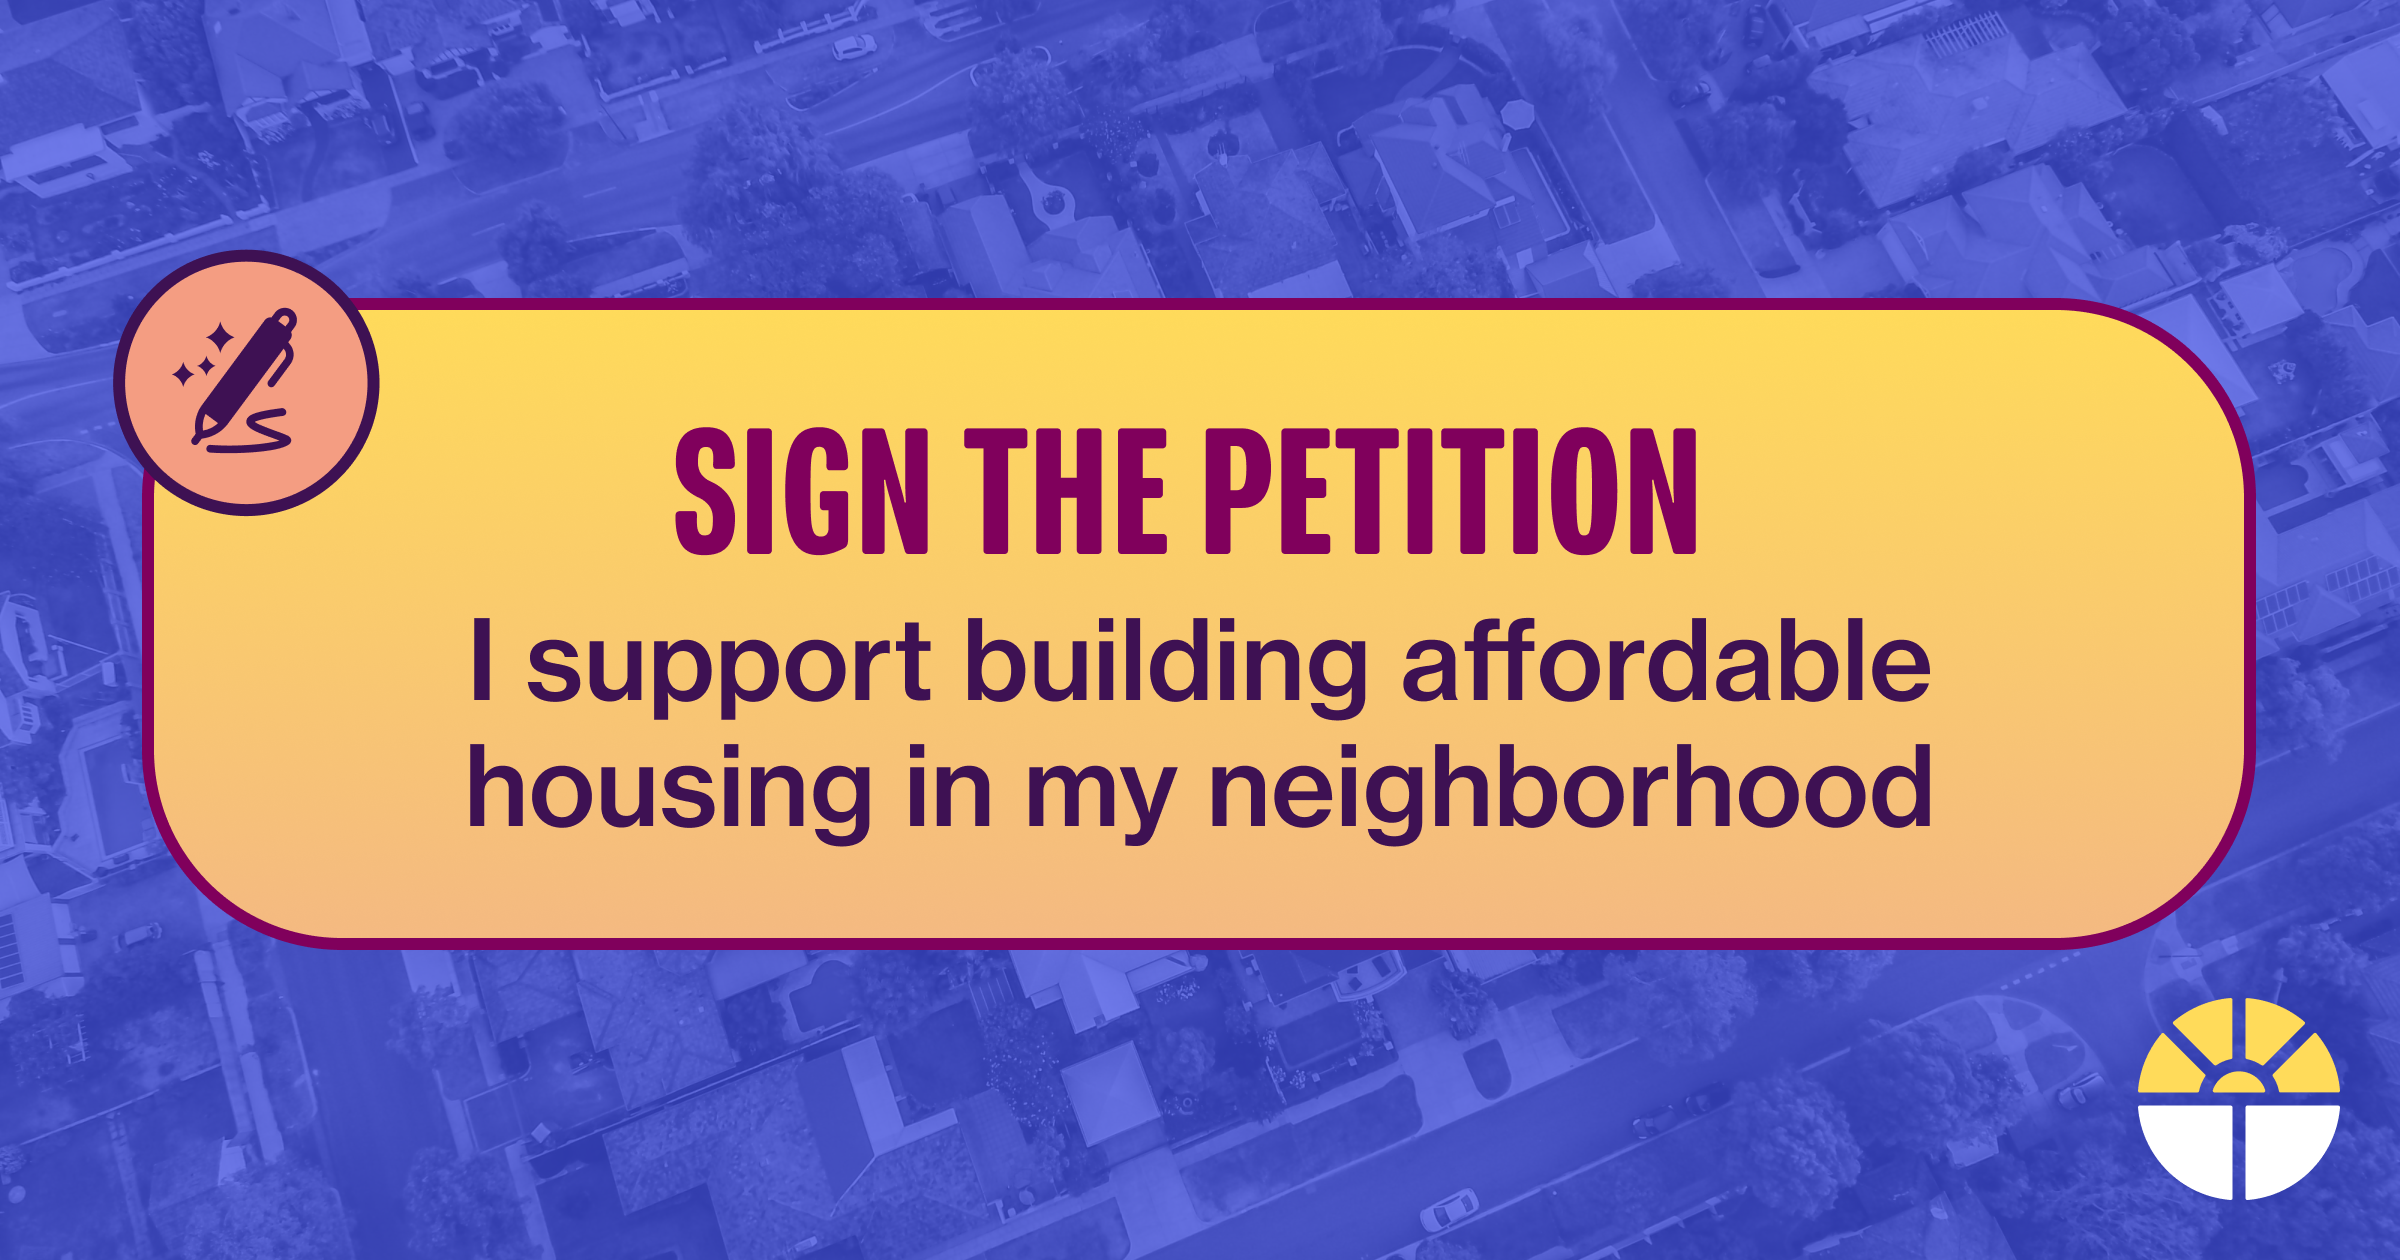 Sign the petition: I support building affordable housing in my neighborhood